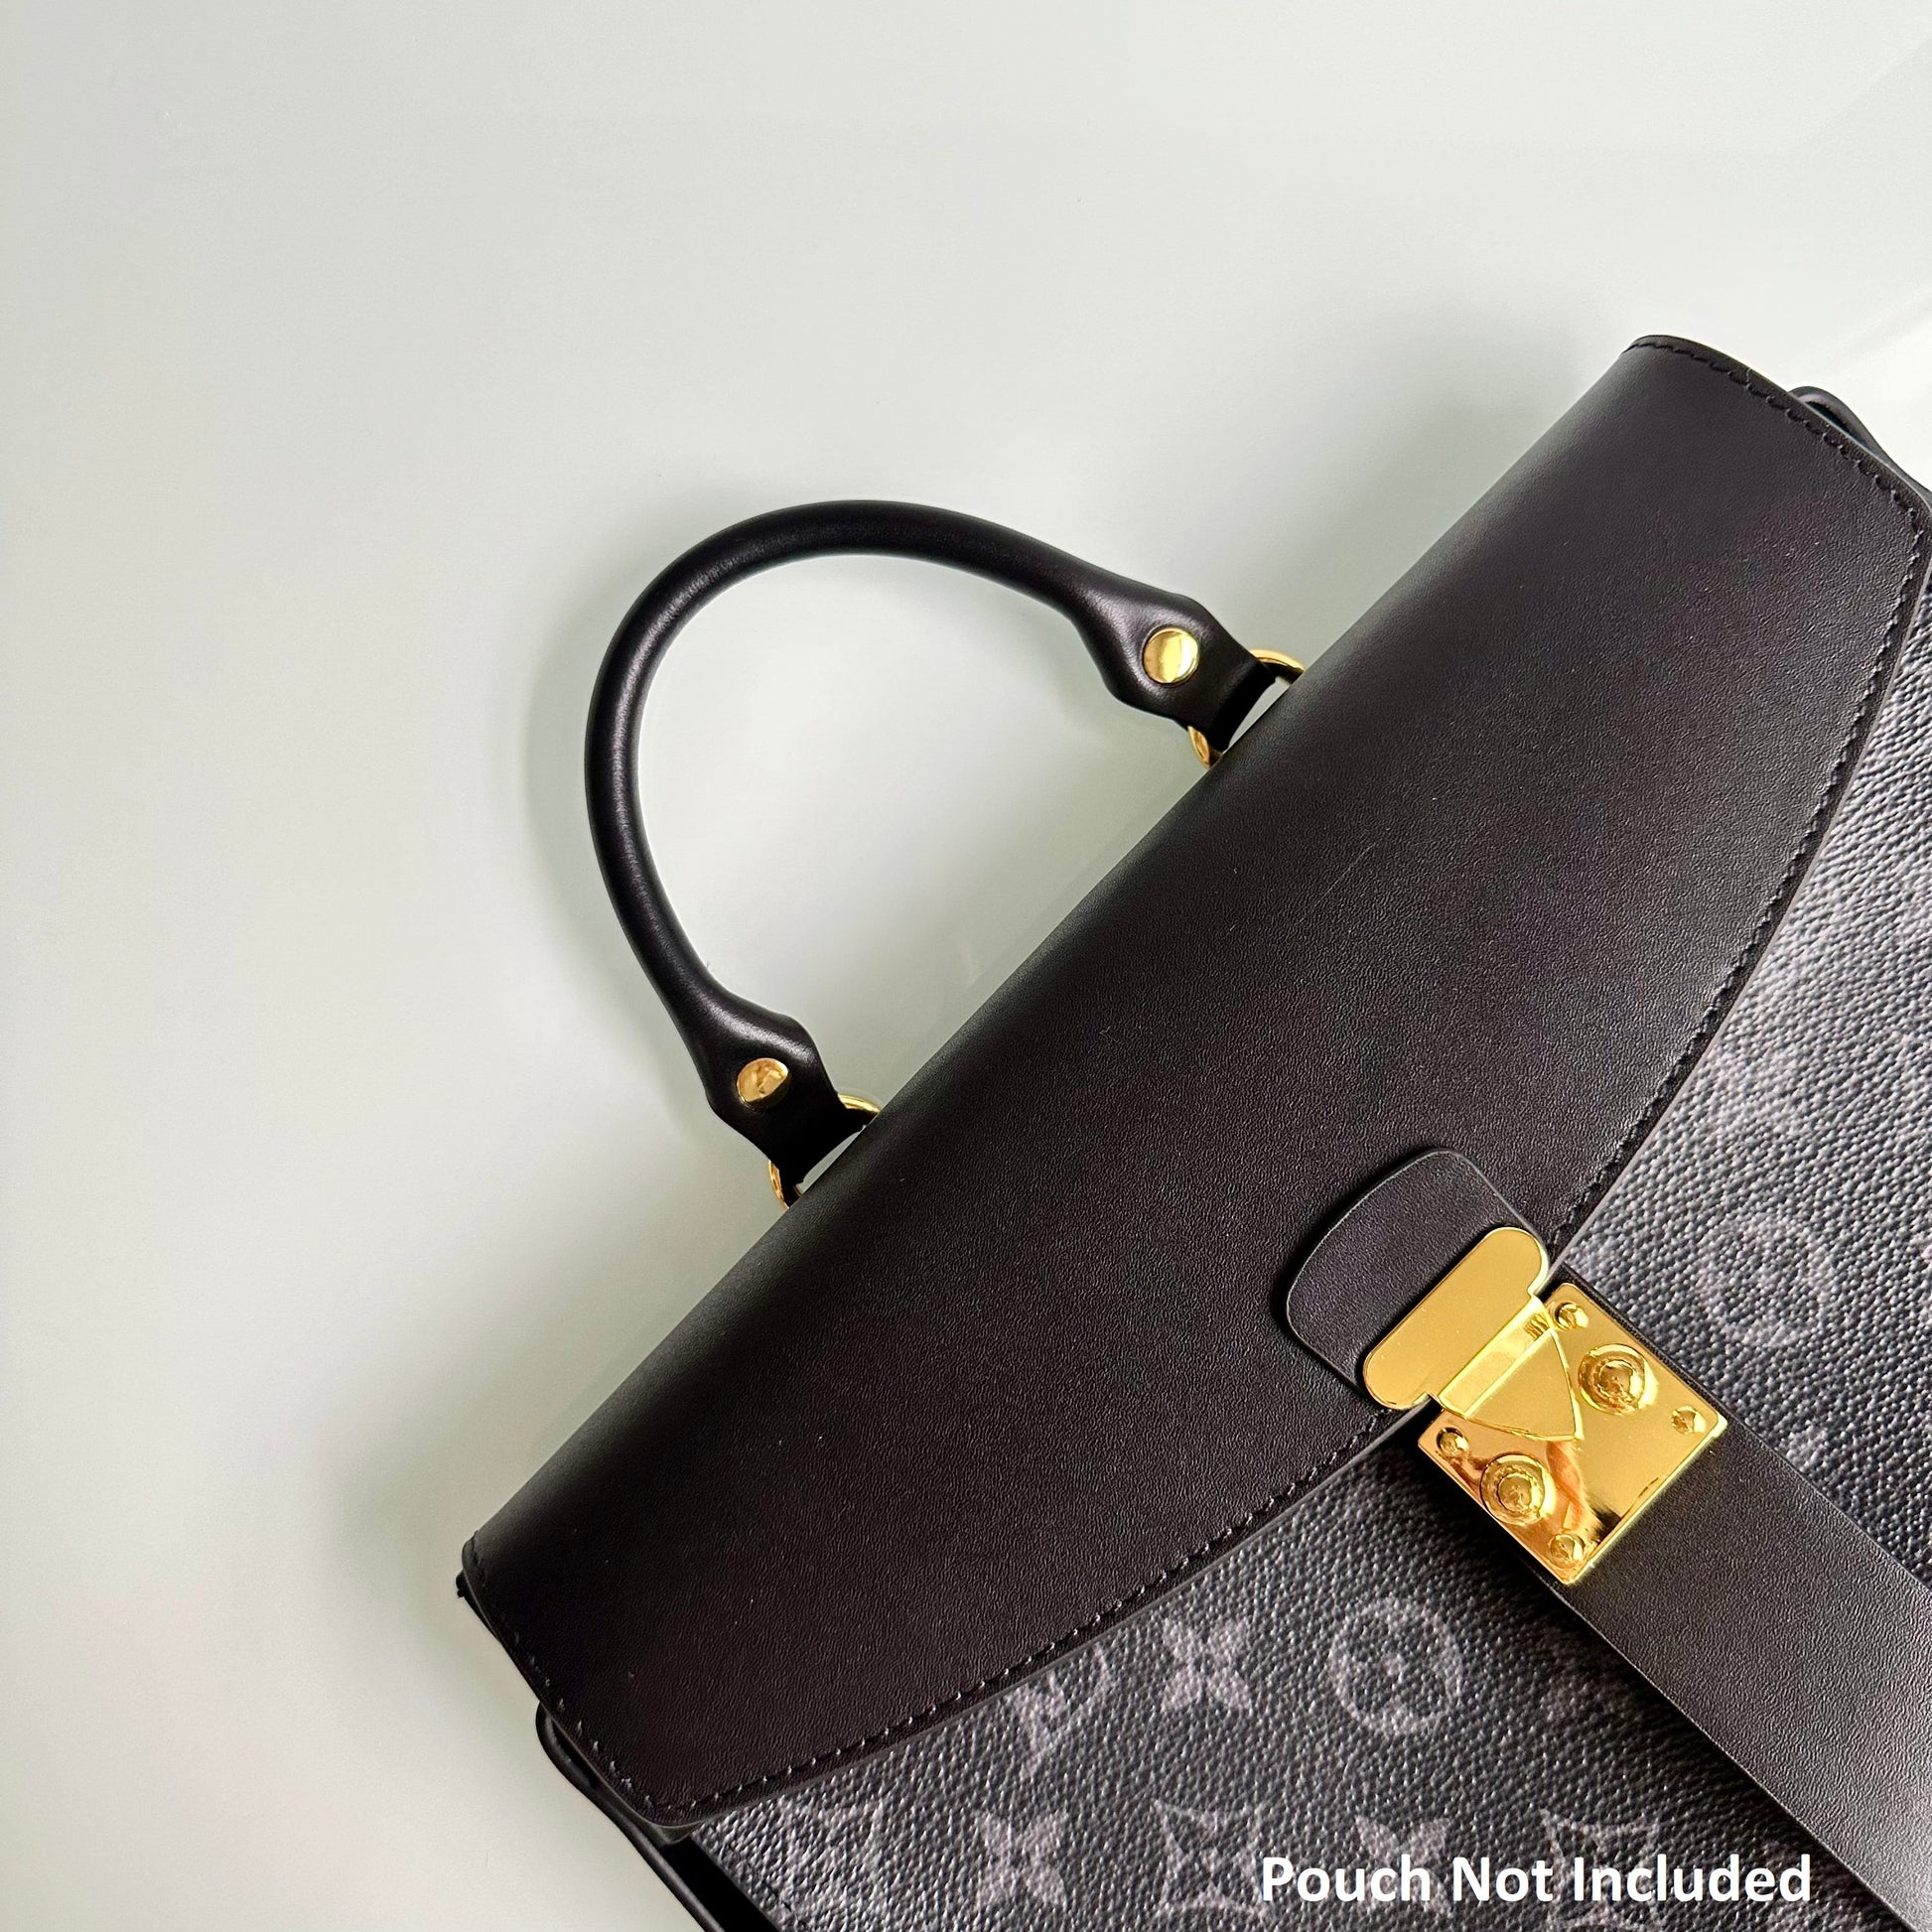 Lv Toiletry Pouch 26 Price Singapore Dollars